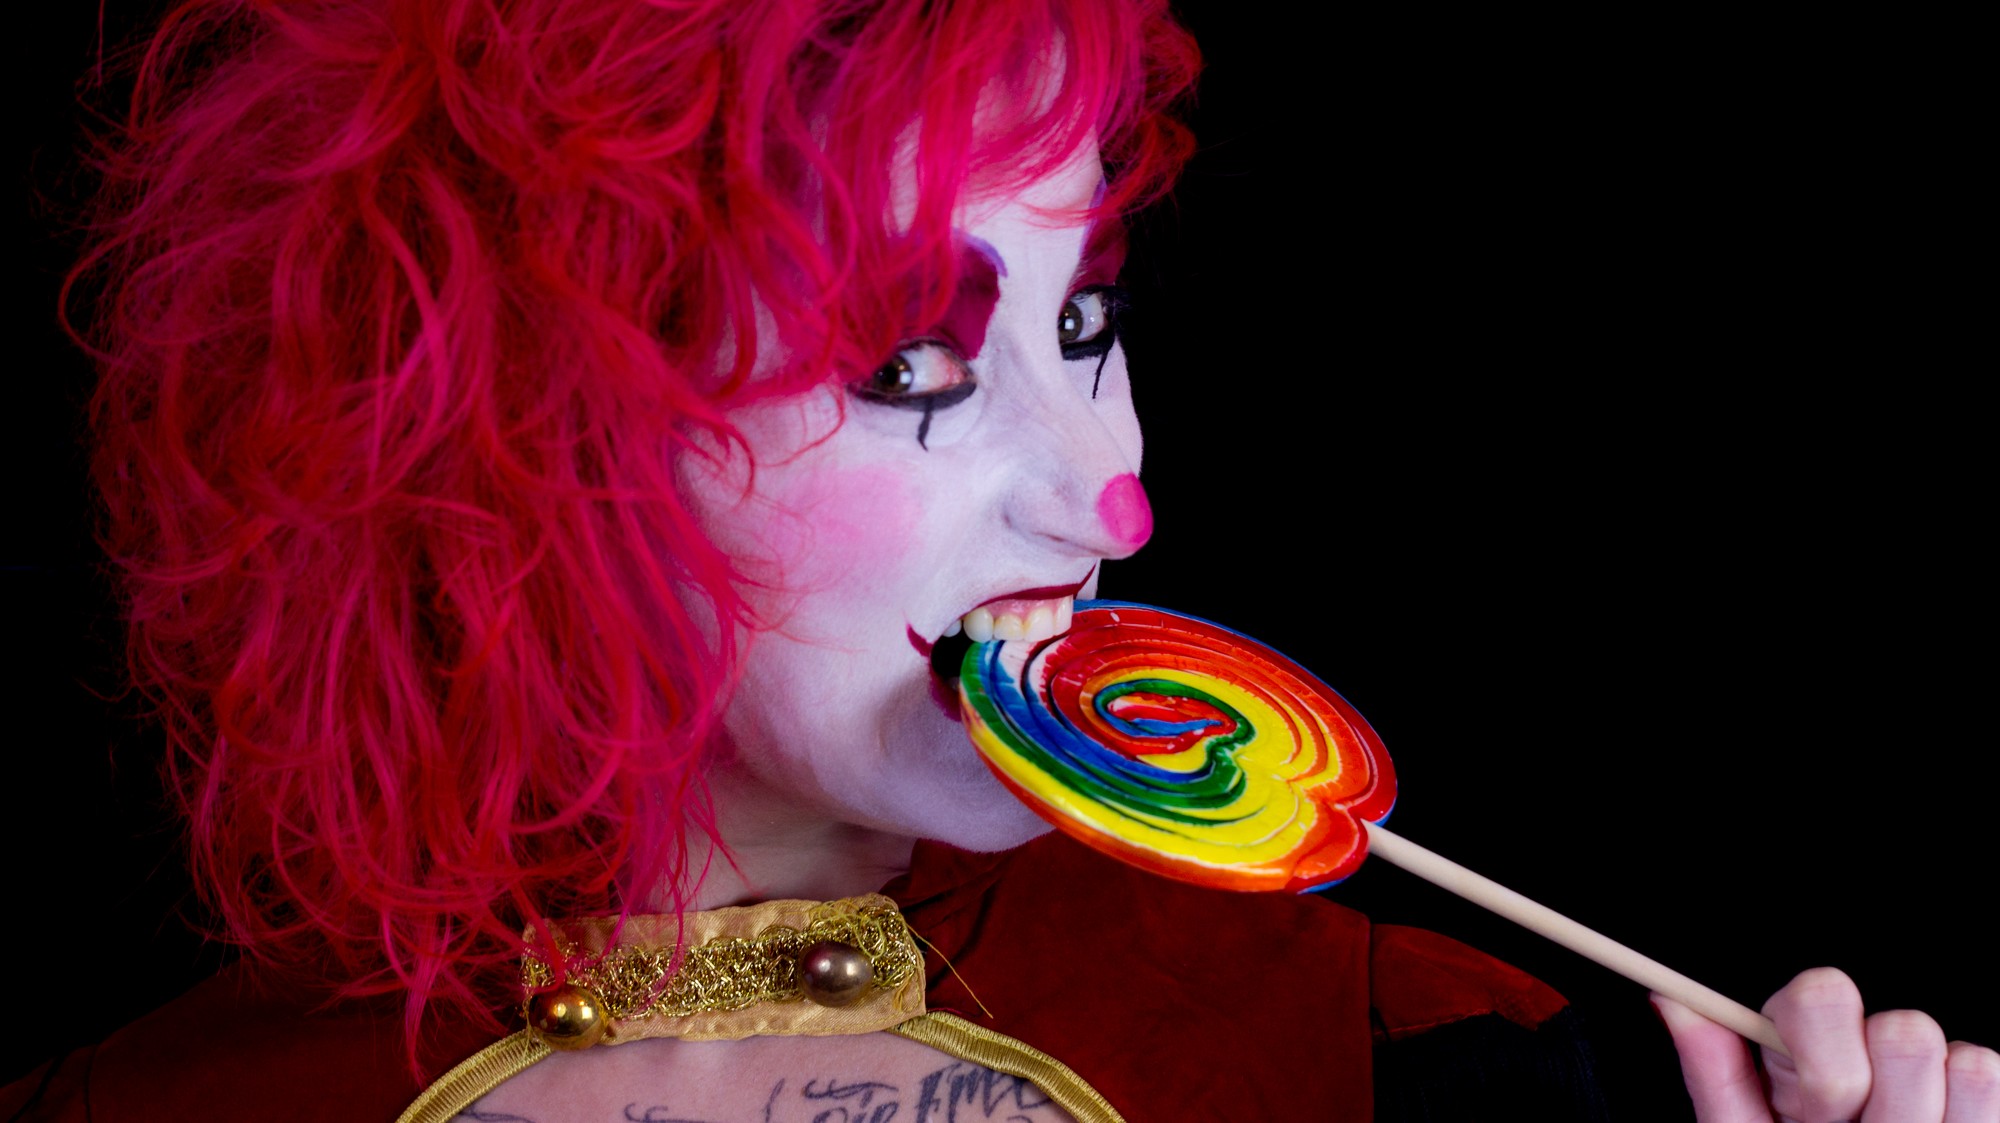 Evil Scary Clown Porn - Inside the Kinky, Brightly Colored World of Clown Fetishists ...